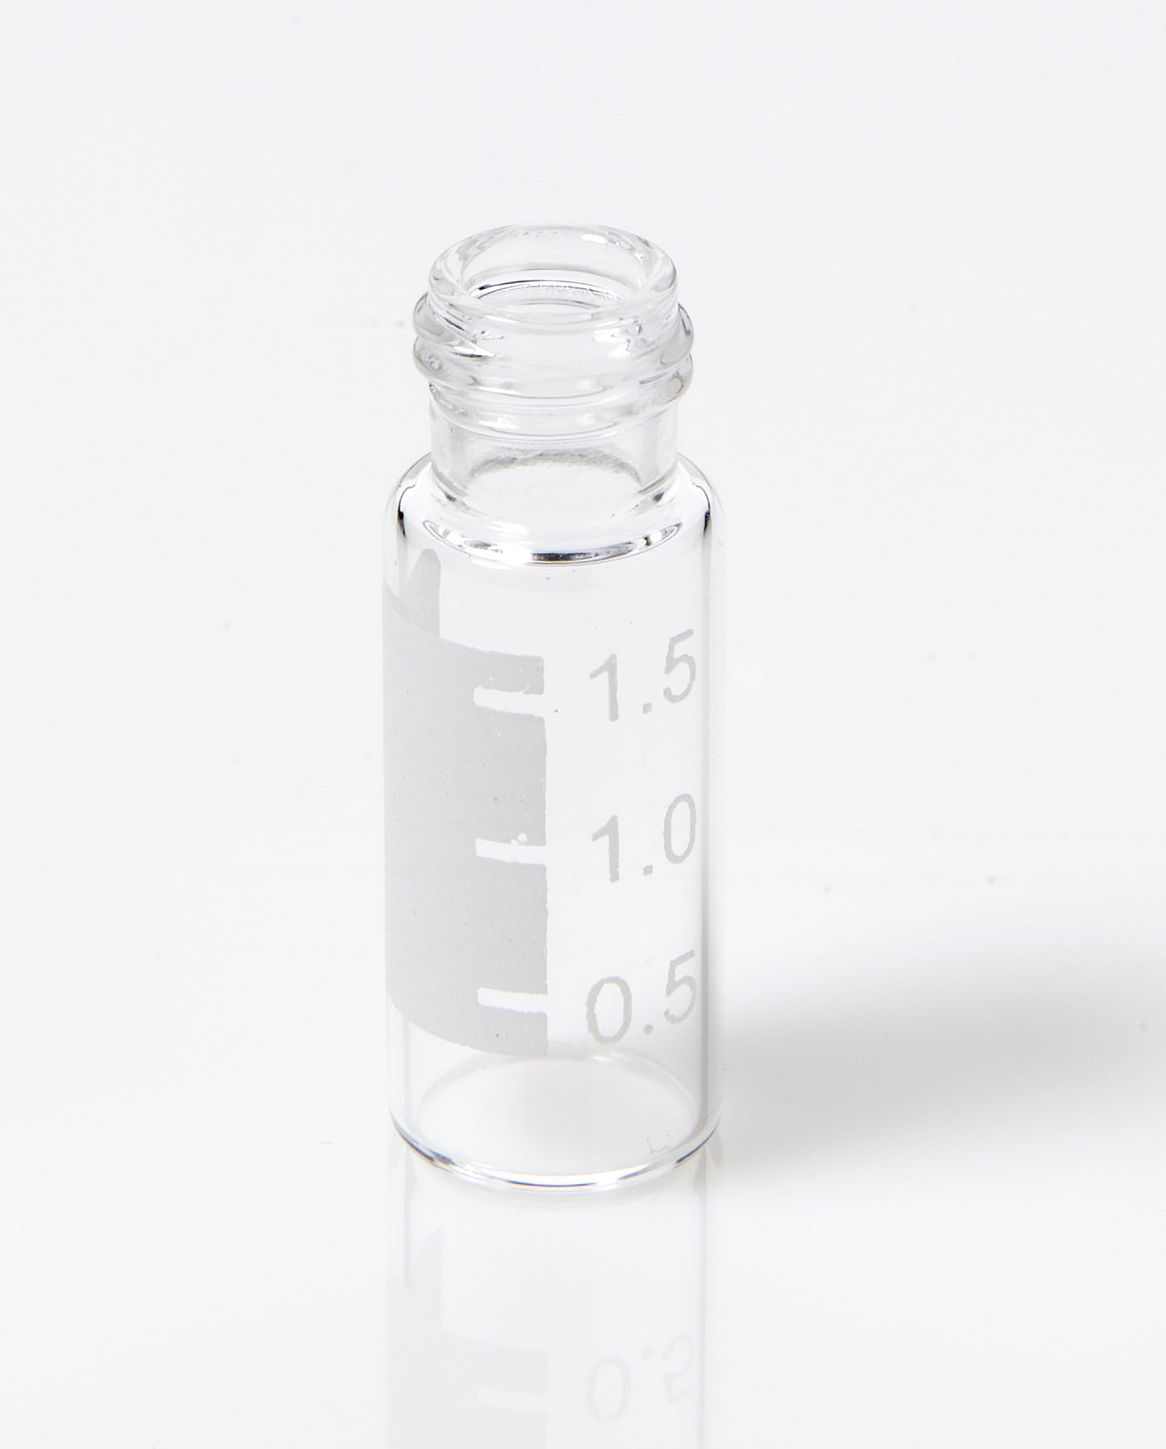 Vial 2mL Clear Glass (12x32mm) with Graduated Marking Spot Wide Mouth 9-425 Screw LC/MS Certified, 100/pk